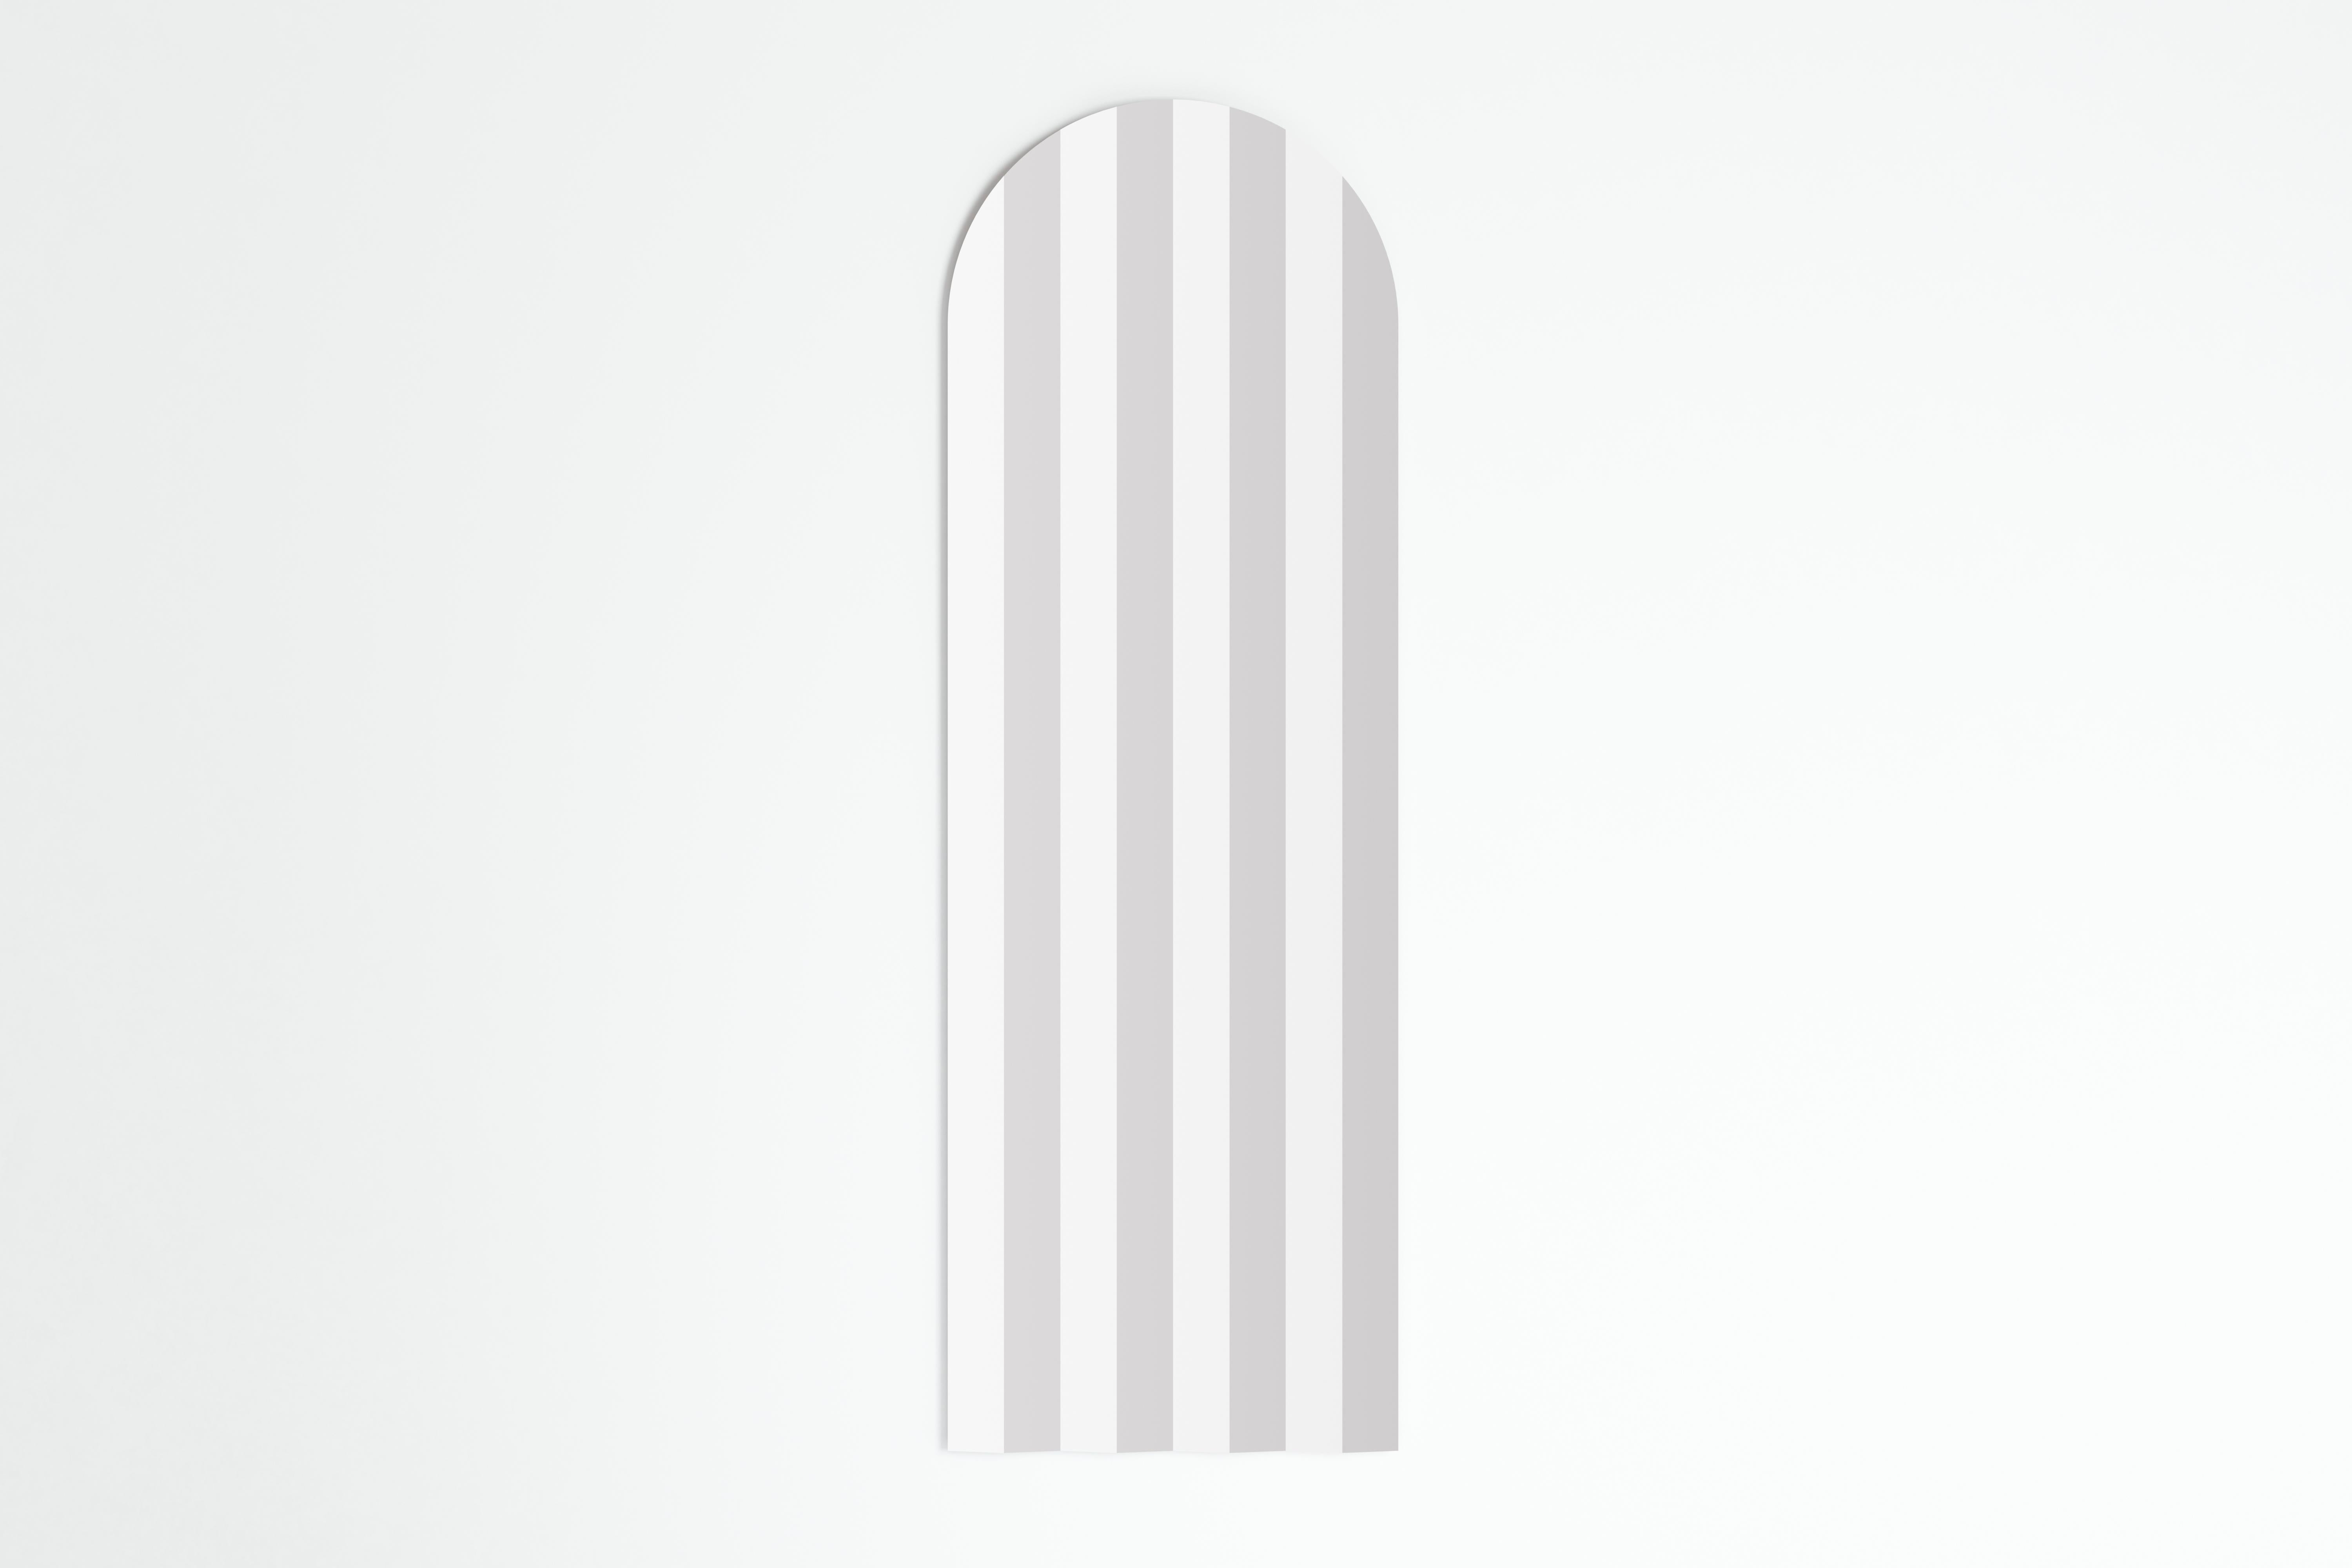 Stripe stand 180 mirror by Sebastian Scherer
Dimensions: D60 x H180 cm
Materials: Stainless steel, wood board (bracket).
Weight: 4.3 kg.
Also available: colors: mirror silver (stainless steel), mirror gold (brass coated stainless steel / mirror